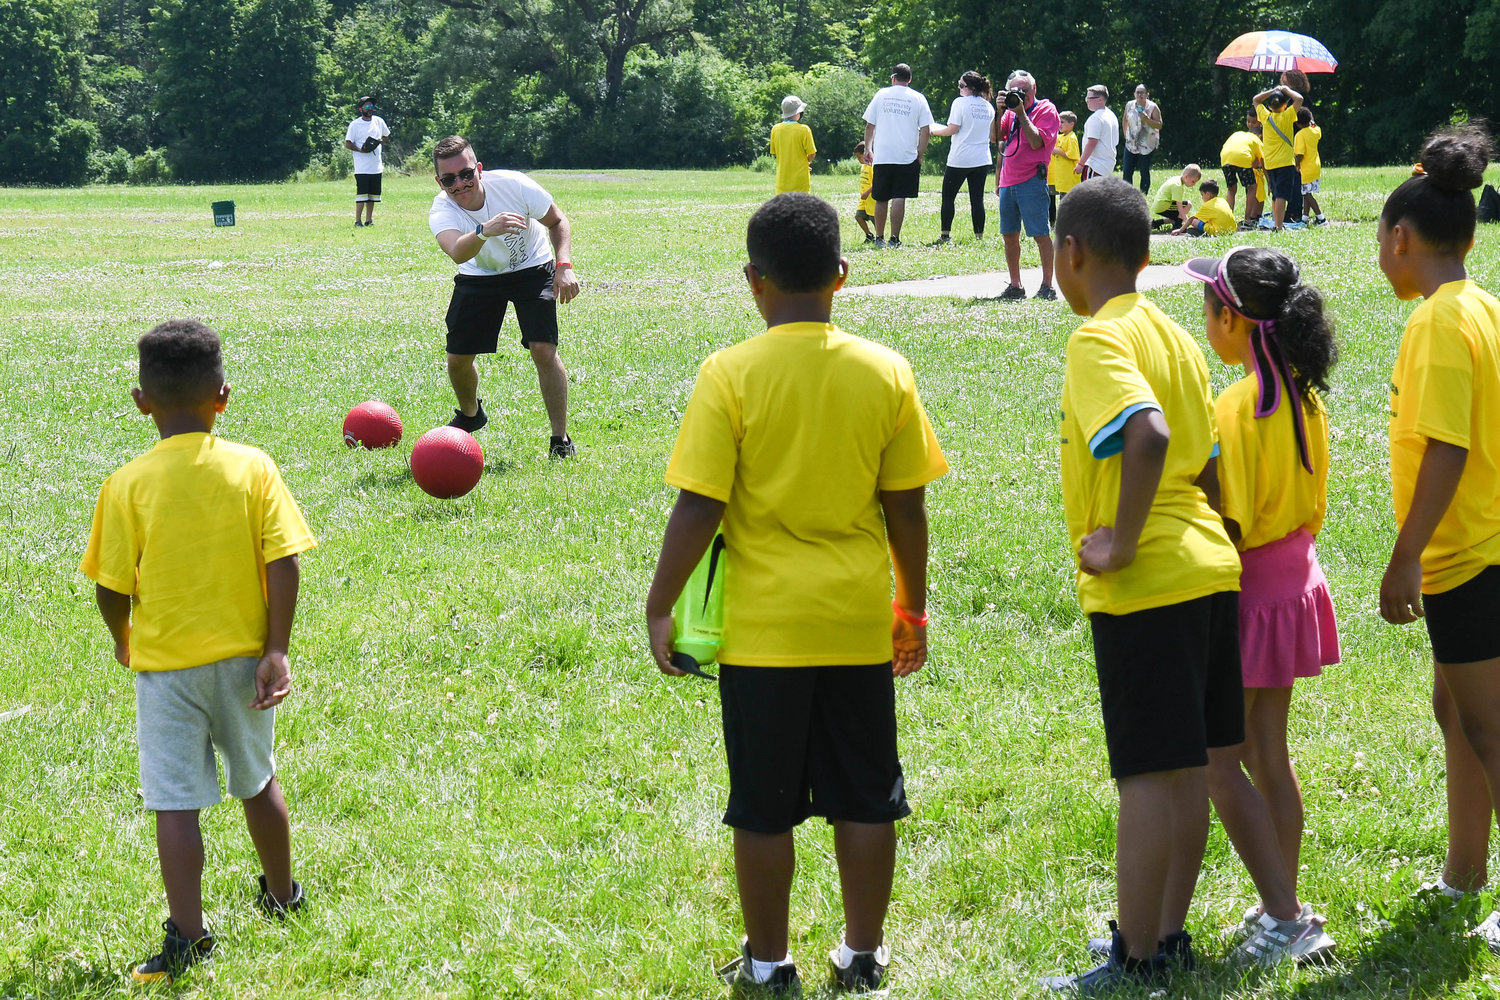 Children play kickball during the Boilermaker Youth Olympics on Thursday at T.R. Proctor Park in Utica.